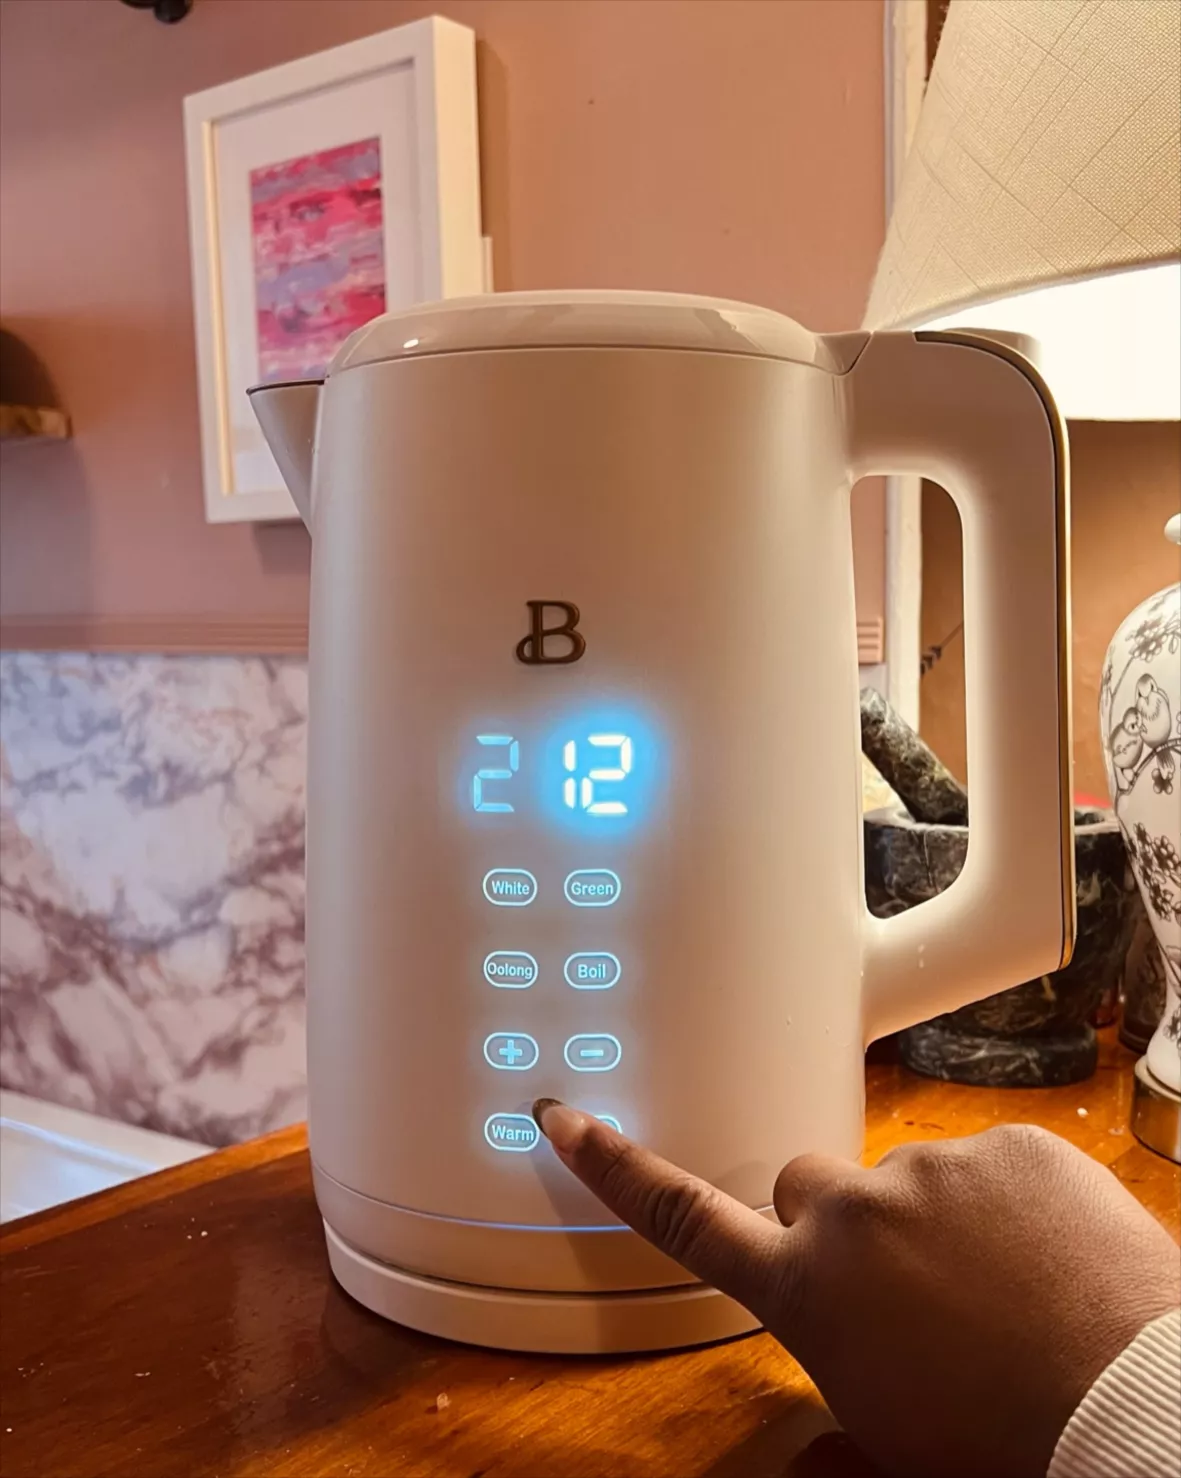 Beautiful 1.7 Liter One-Touch Electric Kettle, by Drew Barrymore (Black  Sesame)